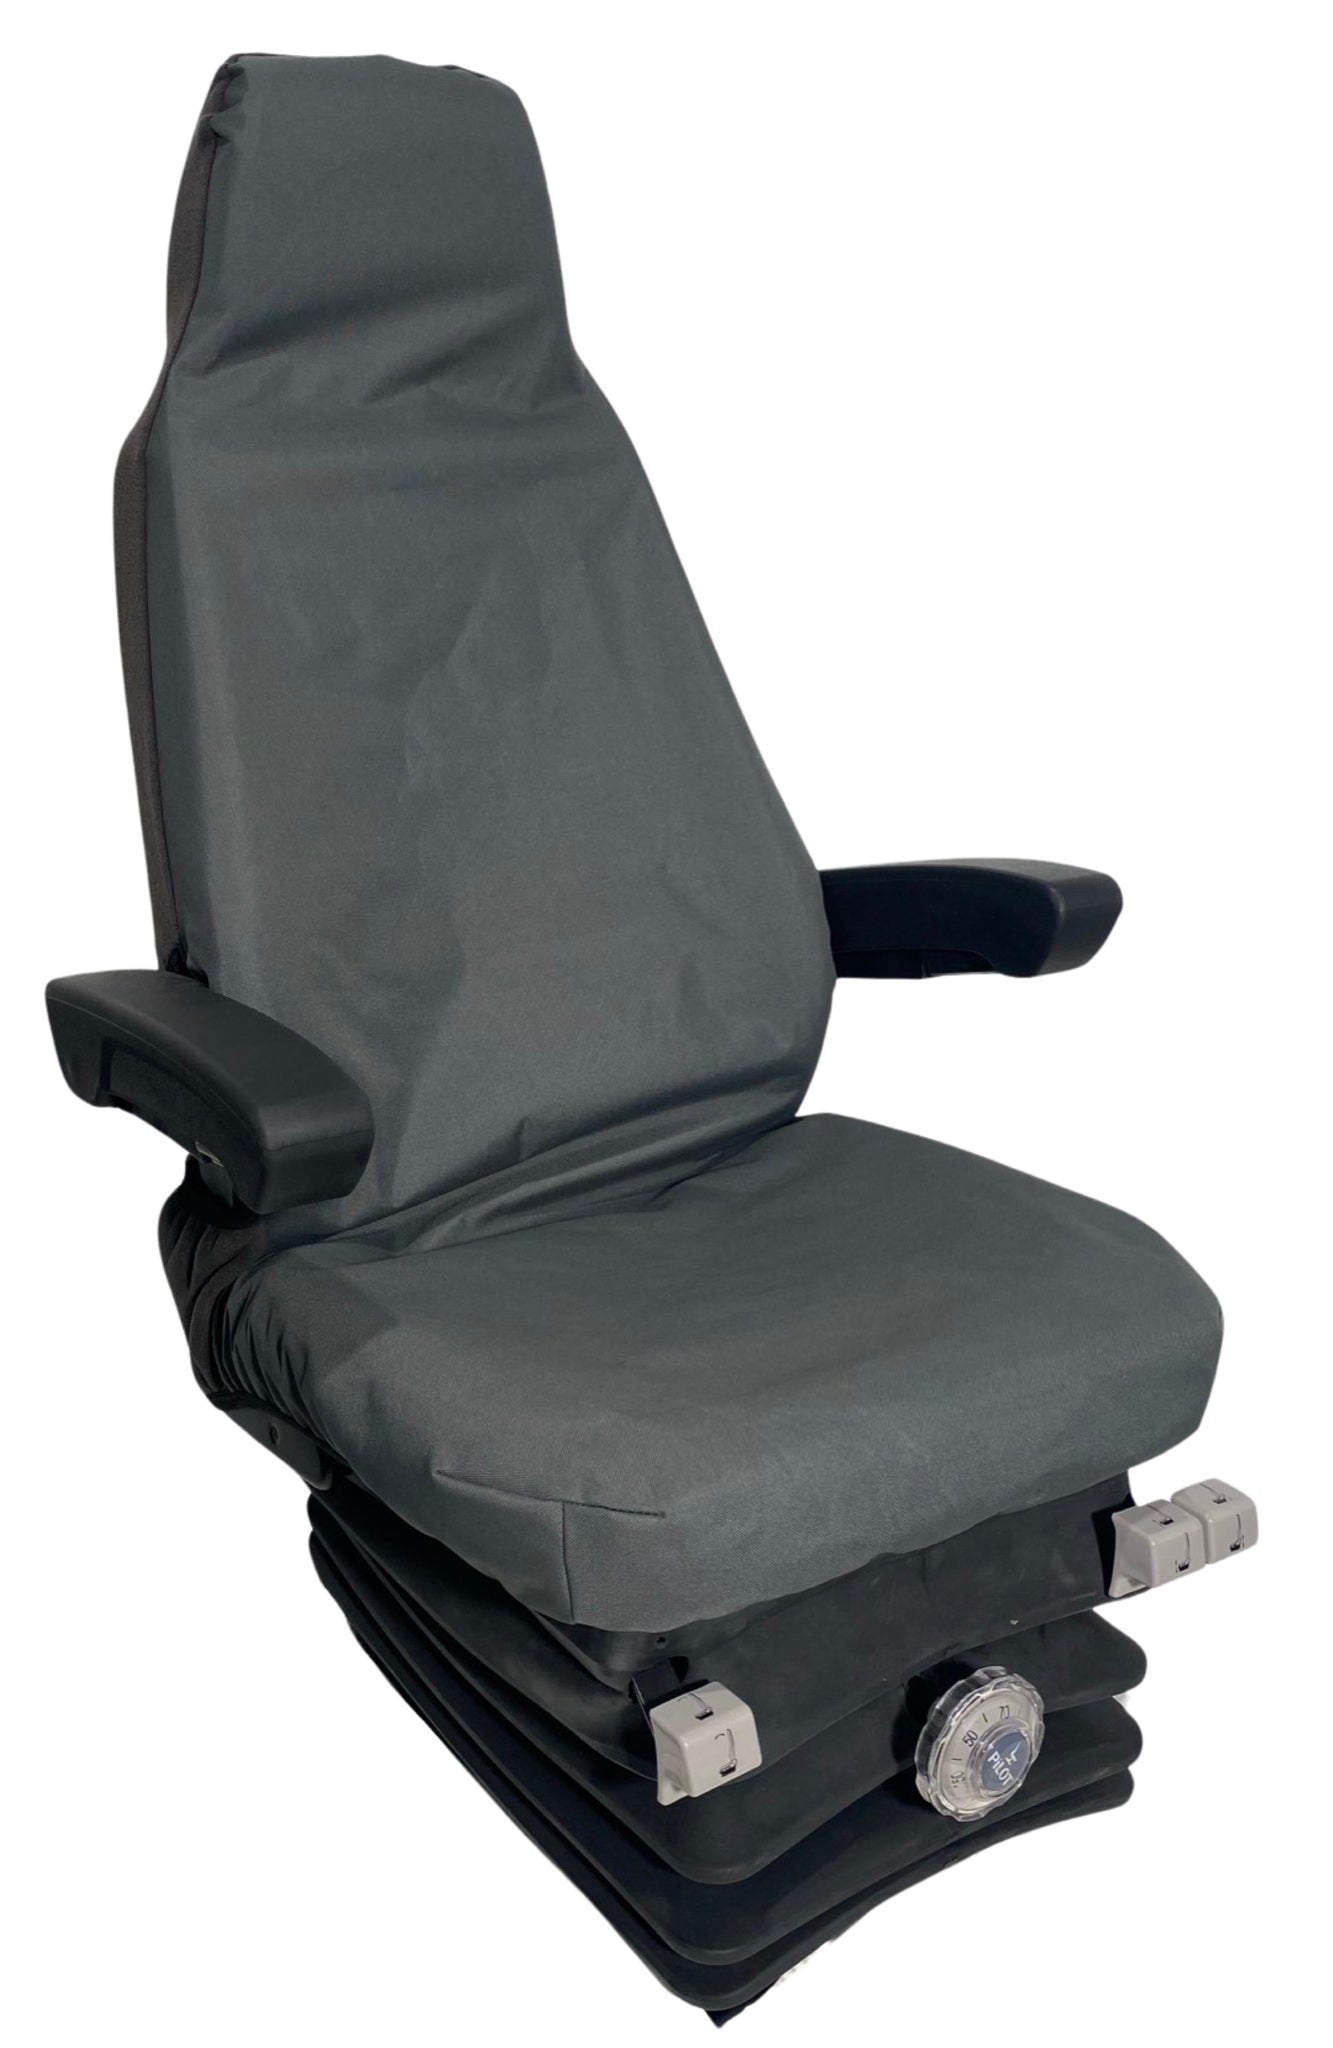 Heavy Duty Canvas Industrial Seat Cover